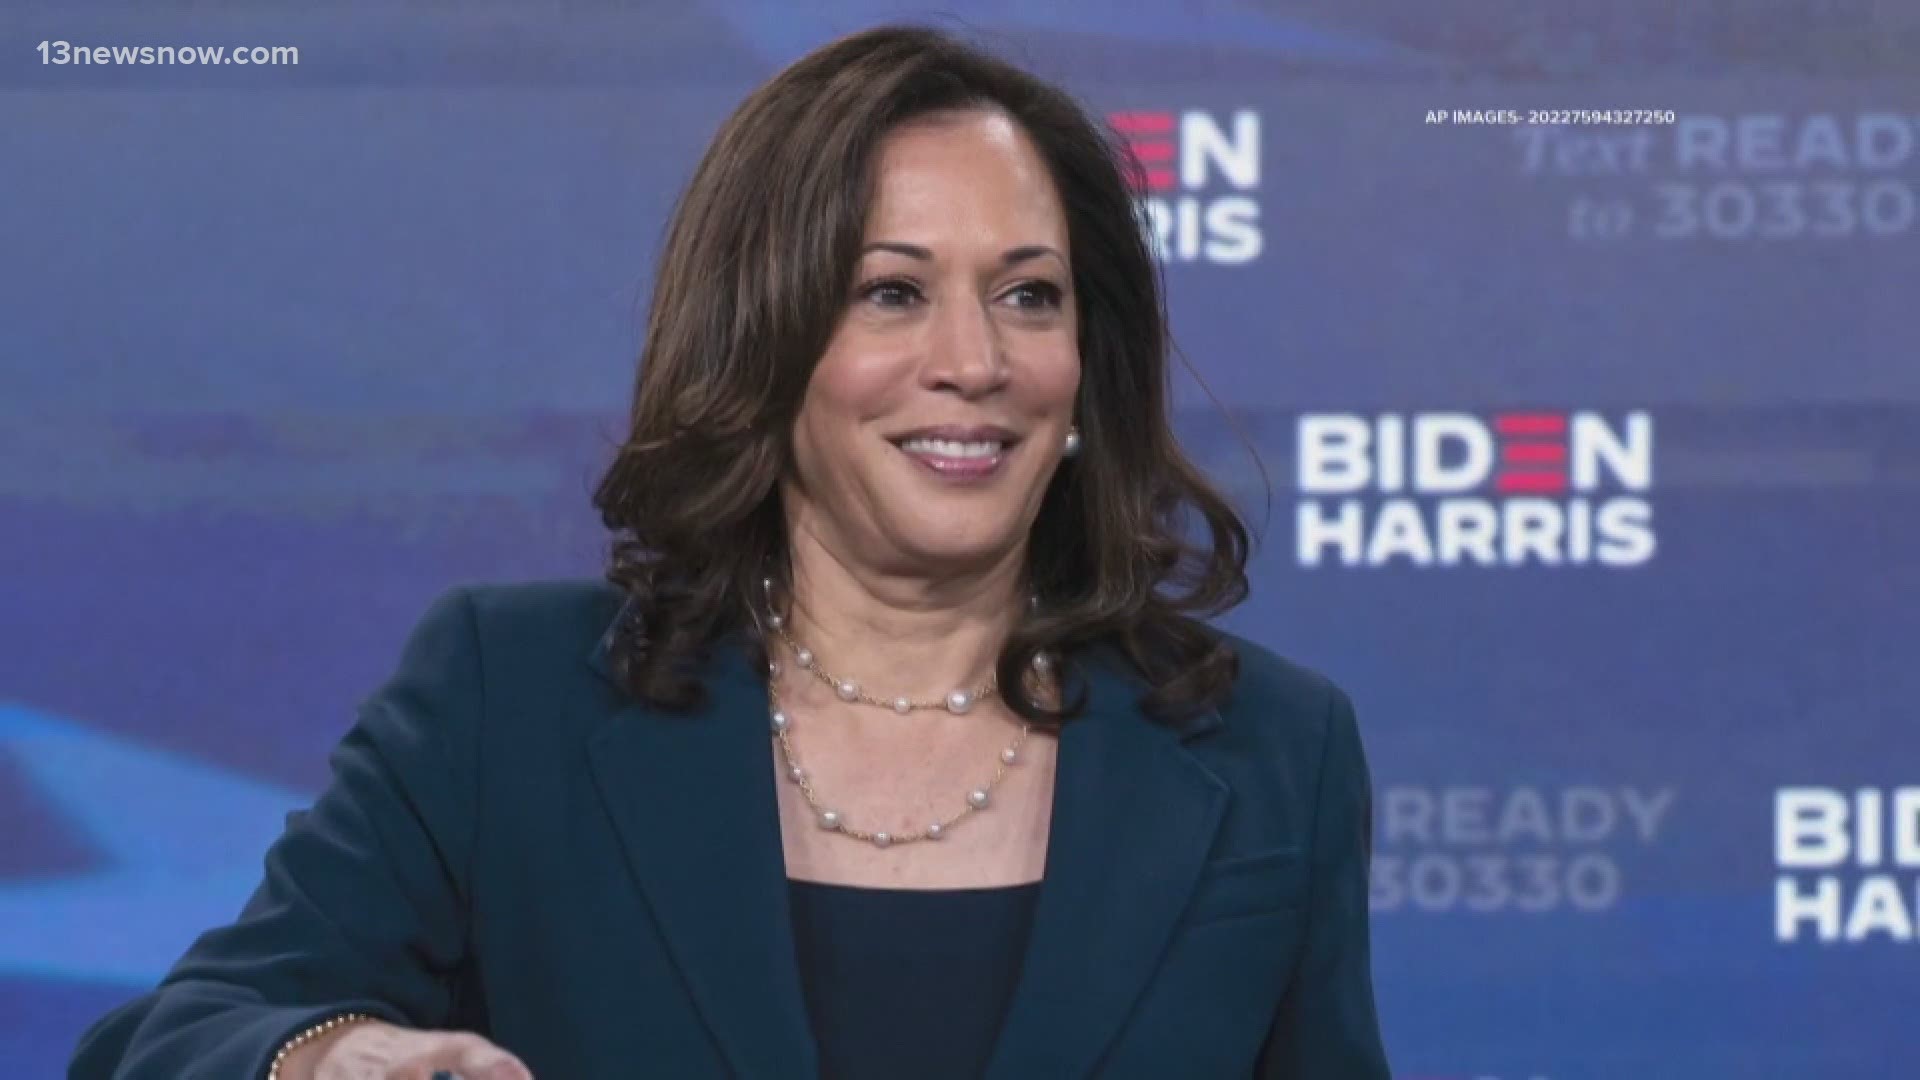 Harris is the first woman, Black person, and south Asian person to hold the office of Vice President of the United States.